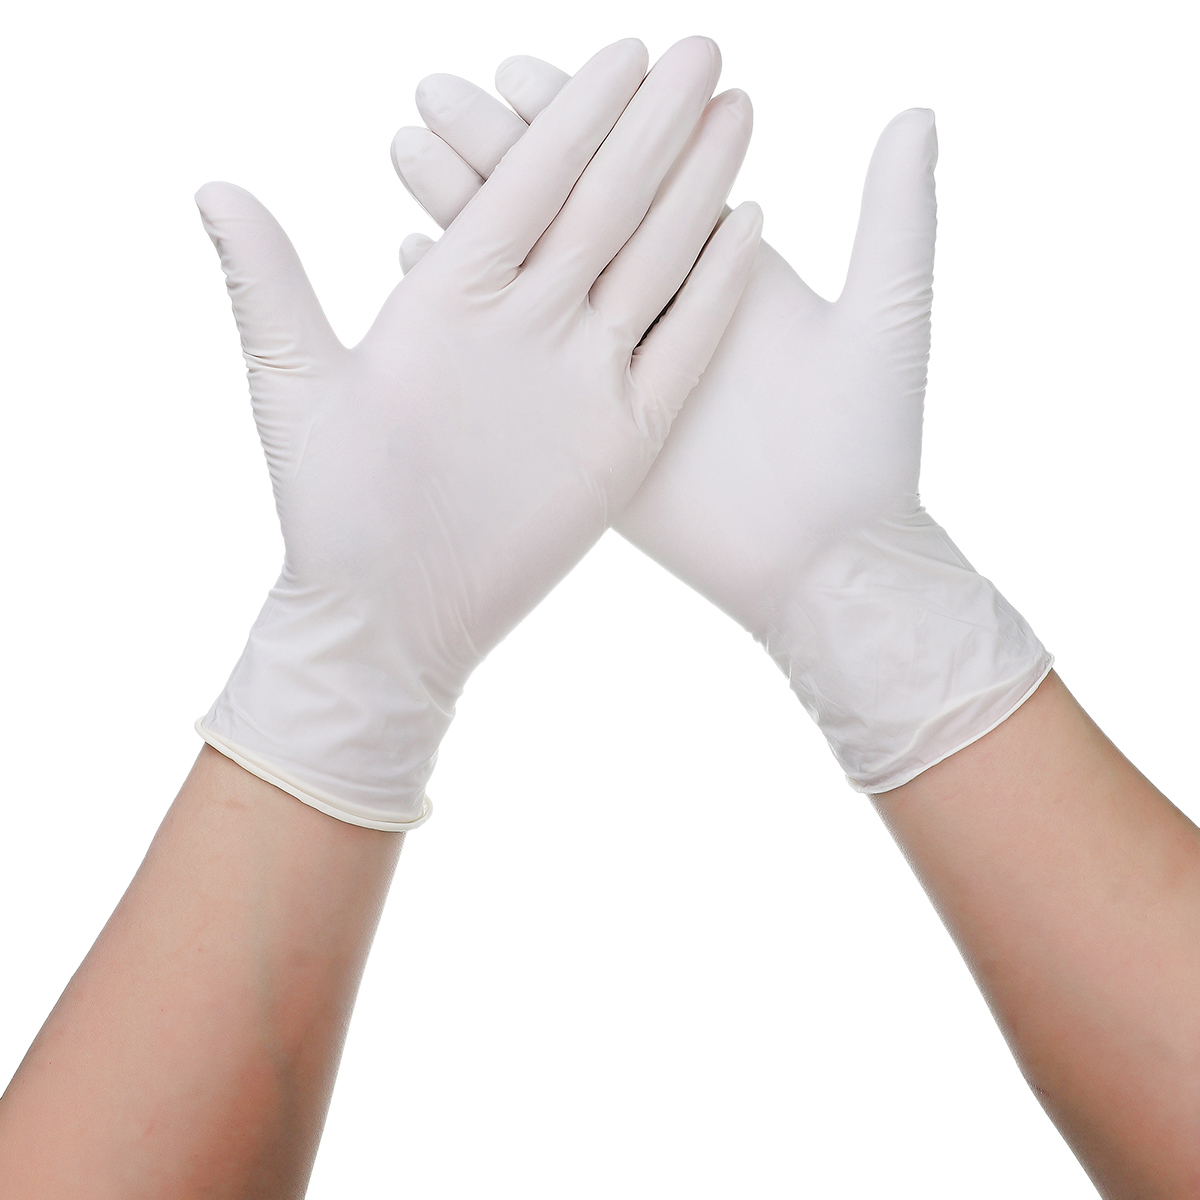 50Pairs-100Pcs-SML-Powder-Free-White-Disposable-Nitrile-Gloves-Suitable-For-Restaurant-Kitchen-Food--1688643-1